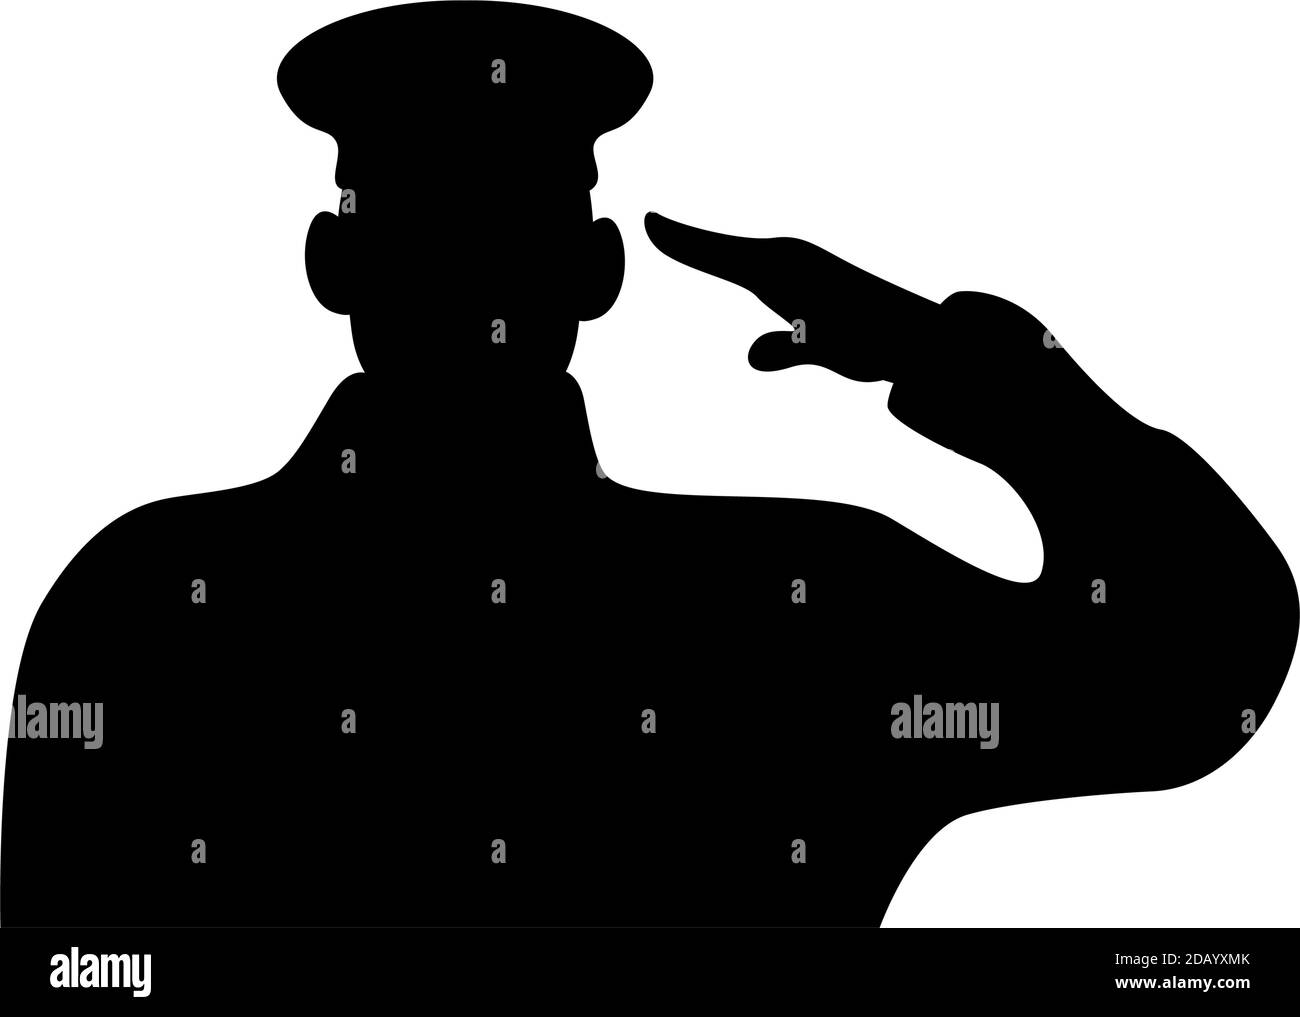 officer military silhouette isolated icon vector illustration design Stock Vector